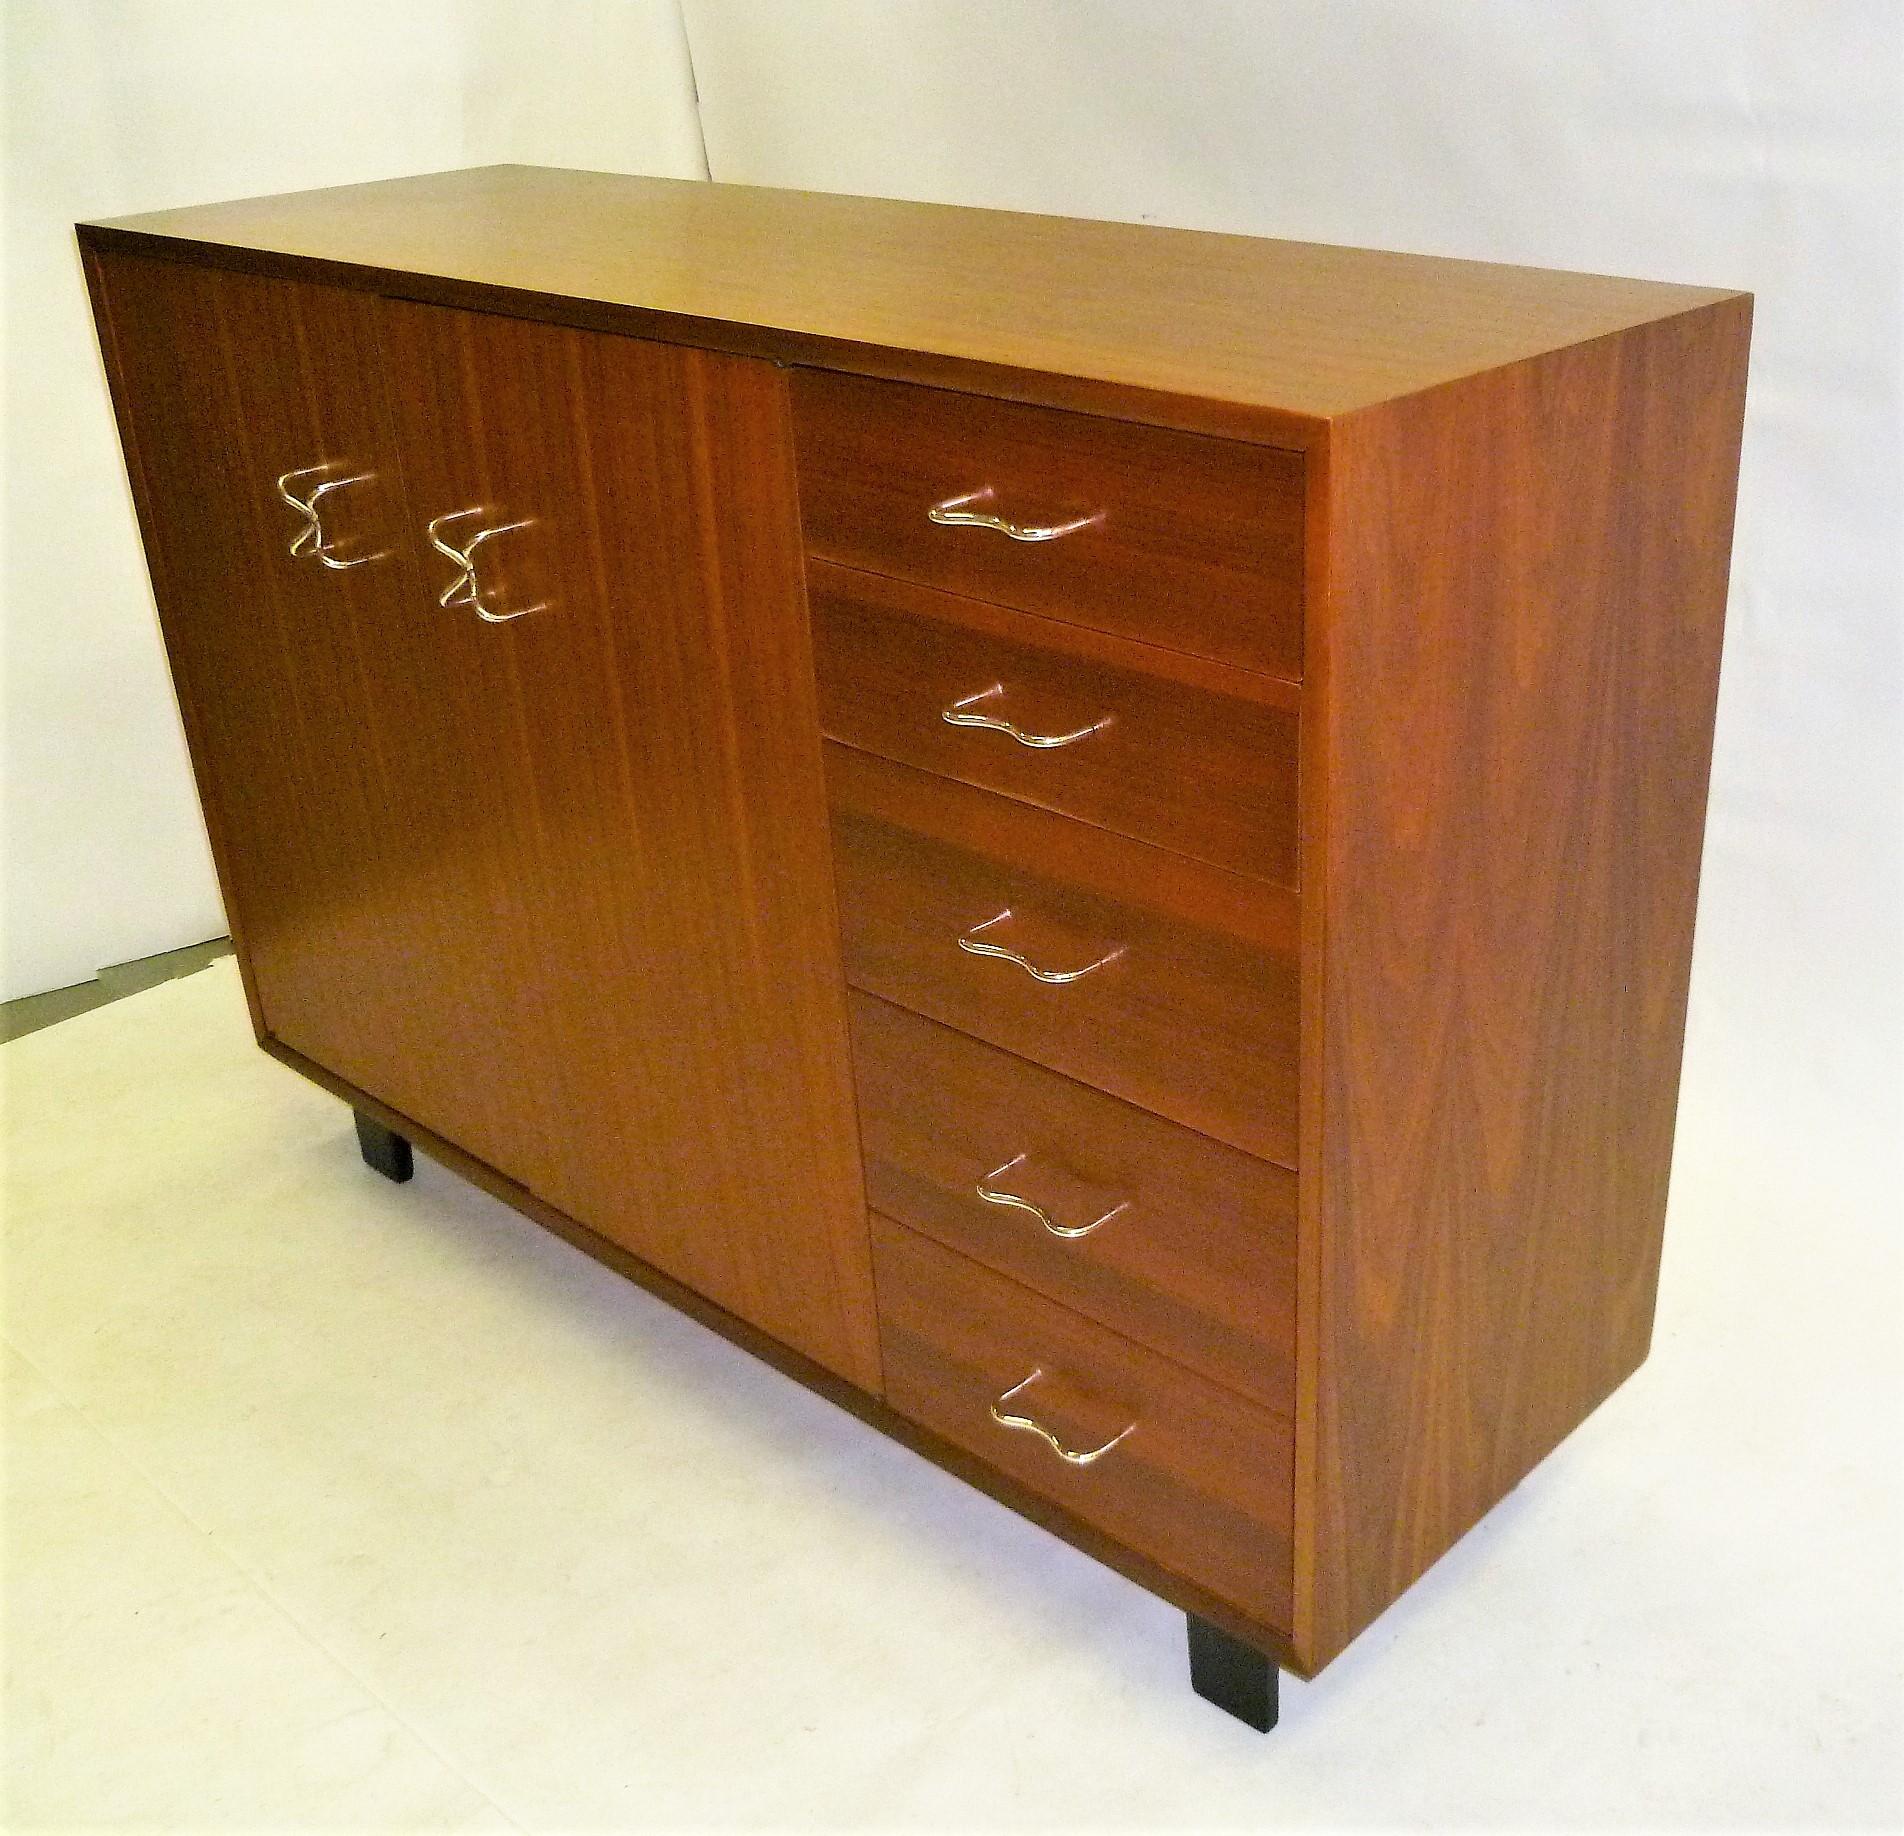 Mid-Century Modern Icon, George Nelson created this wonderfully figured walnut sideboard for the 1952 Herman Miller Collection, Model 4937. Featuring five drawers on the right side and two doors on the left opening to adjustable shelves and two cork